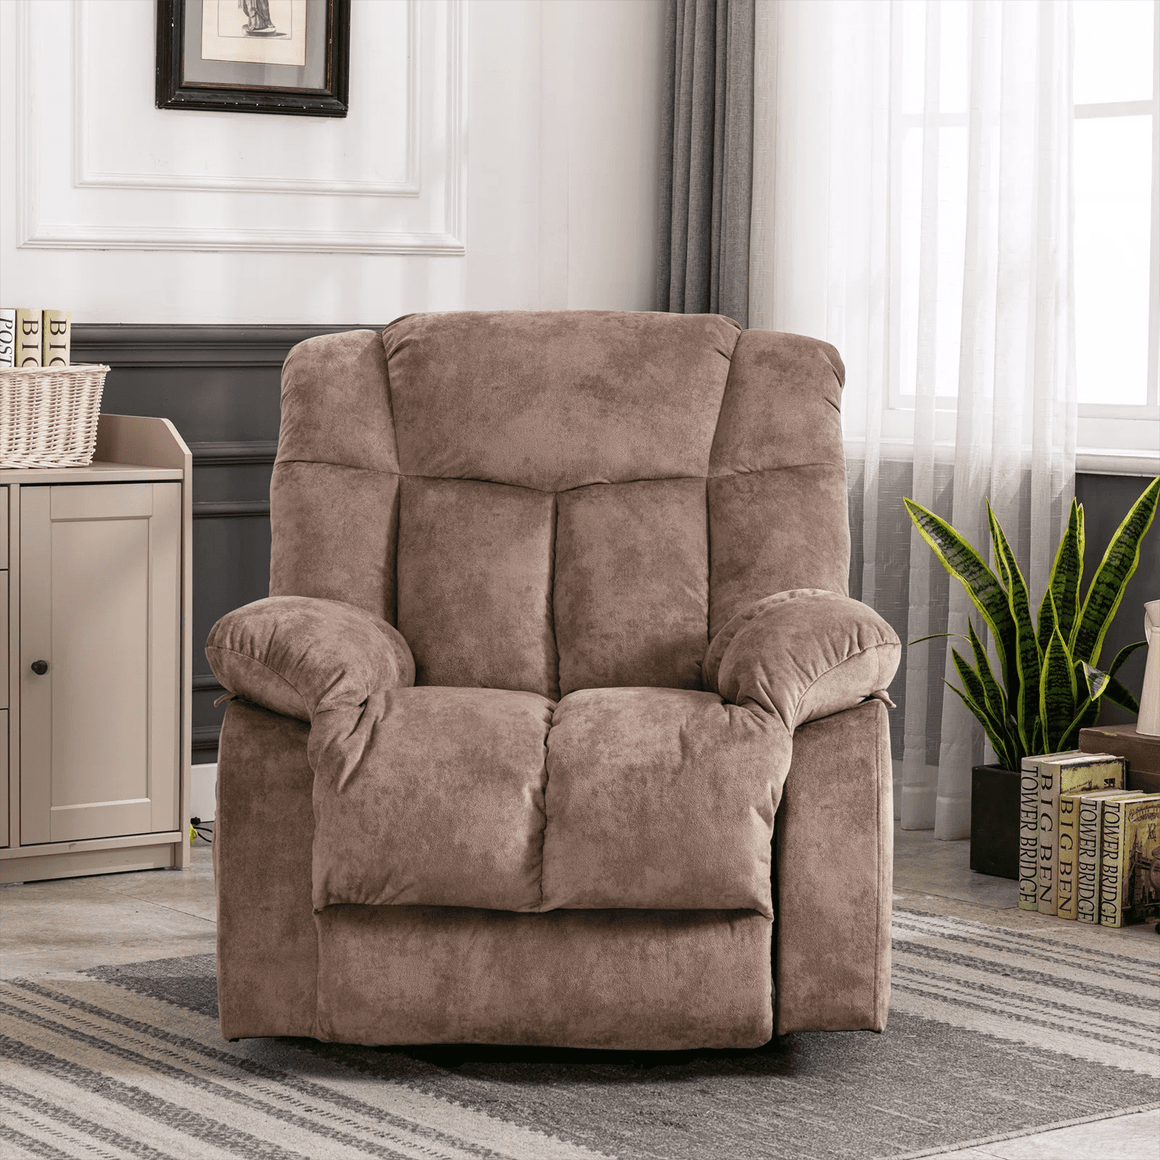 Electric Recliner Chair, Heavy Duty Power Lift Recliners for Elderly, 300 lb Capacity Bedroom Chair with Side Pockets, Remote Controller, Modern Fabric Reclining Office Chair